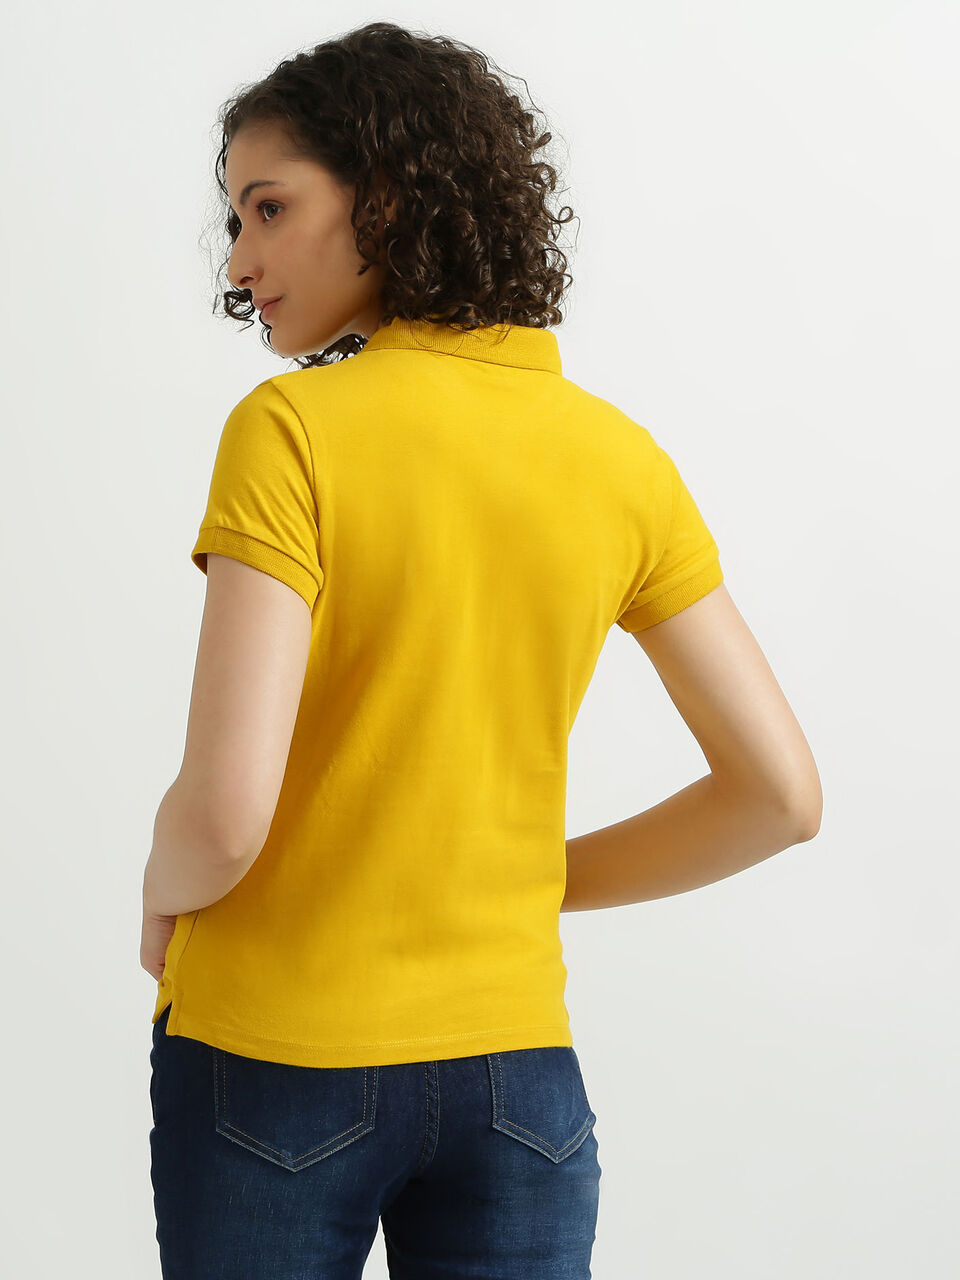 Solid Yellow Polo T-Shirt - Yellow